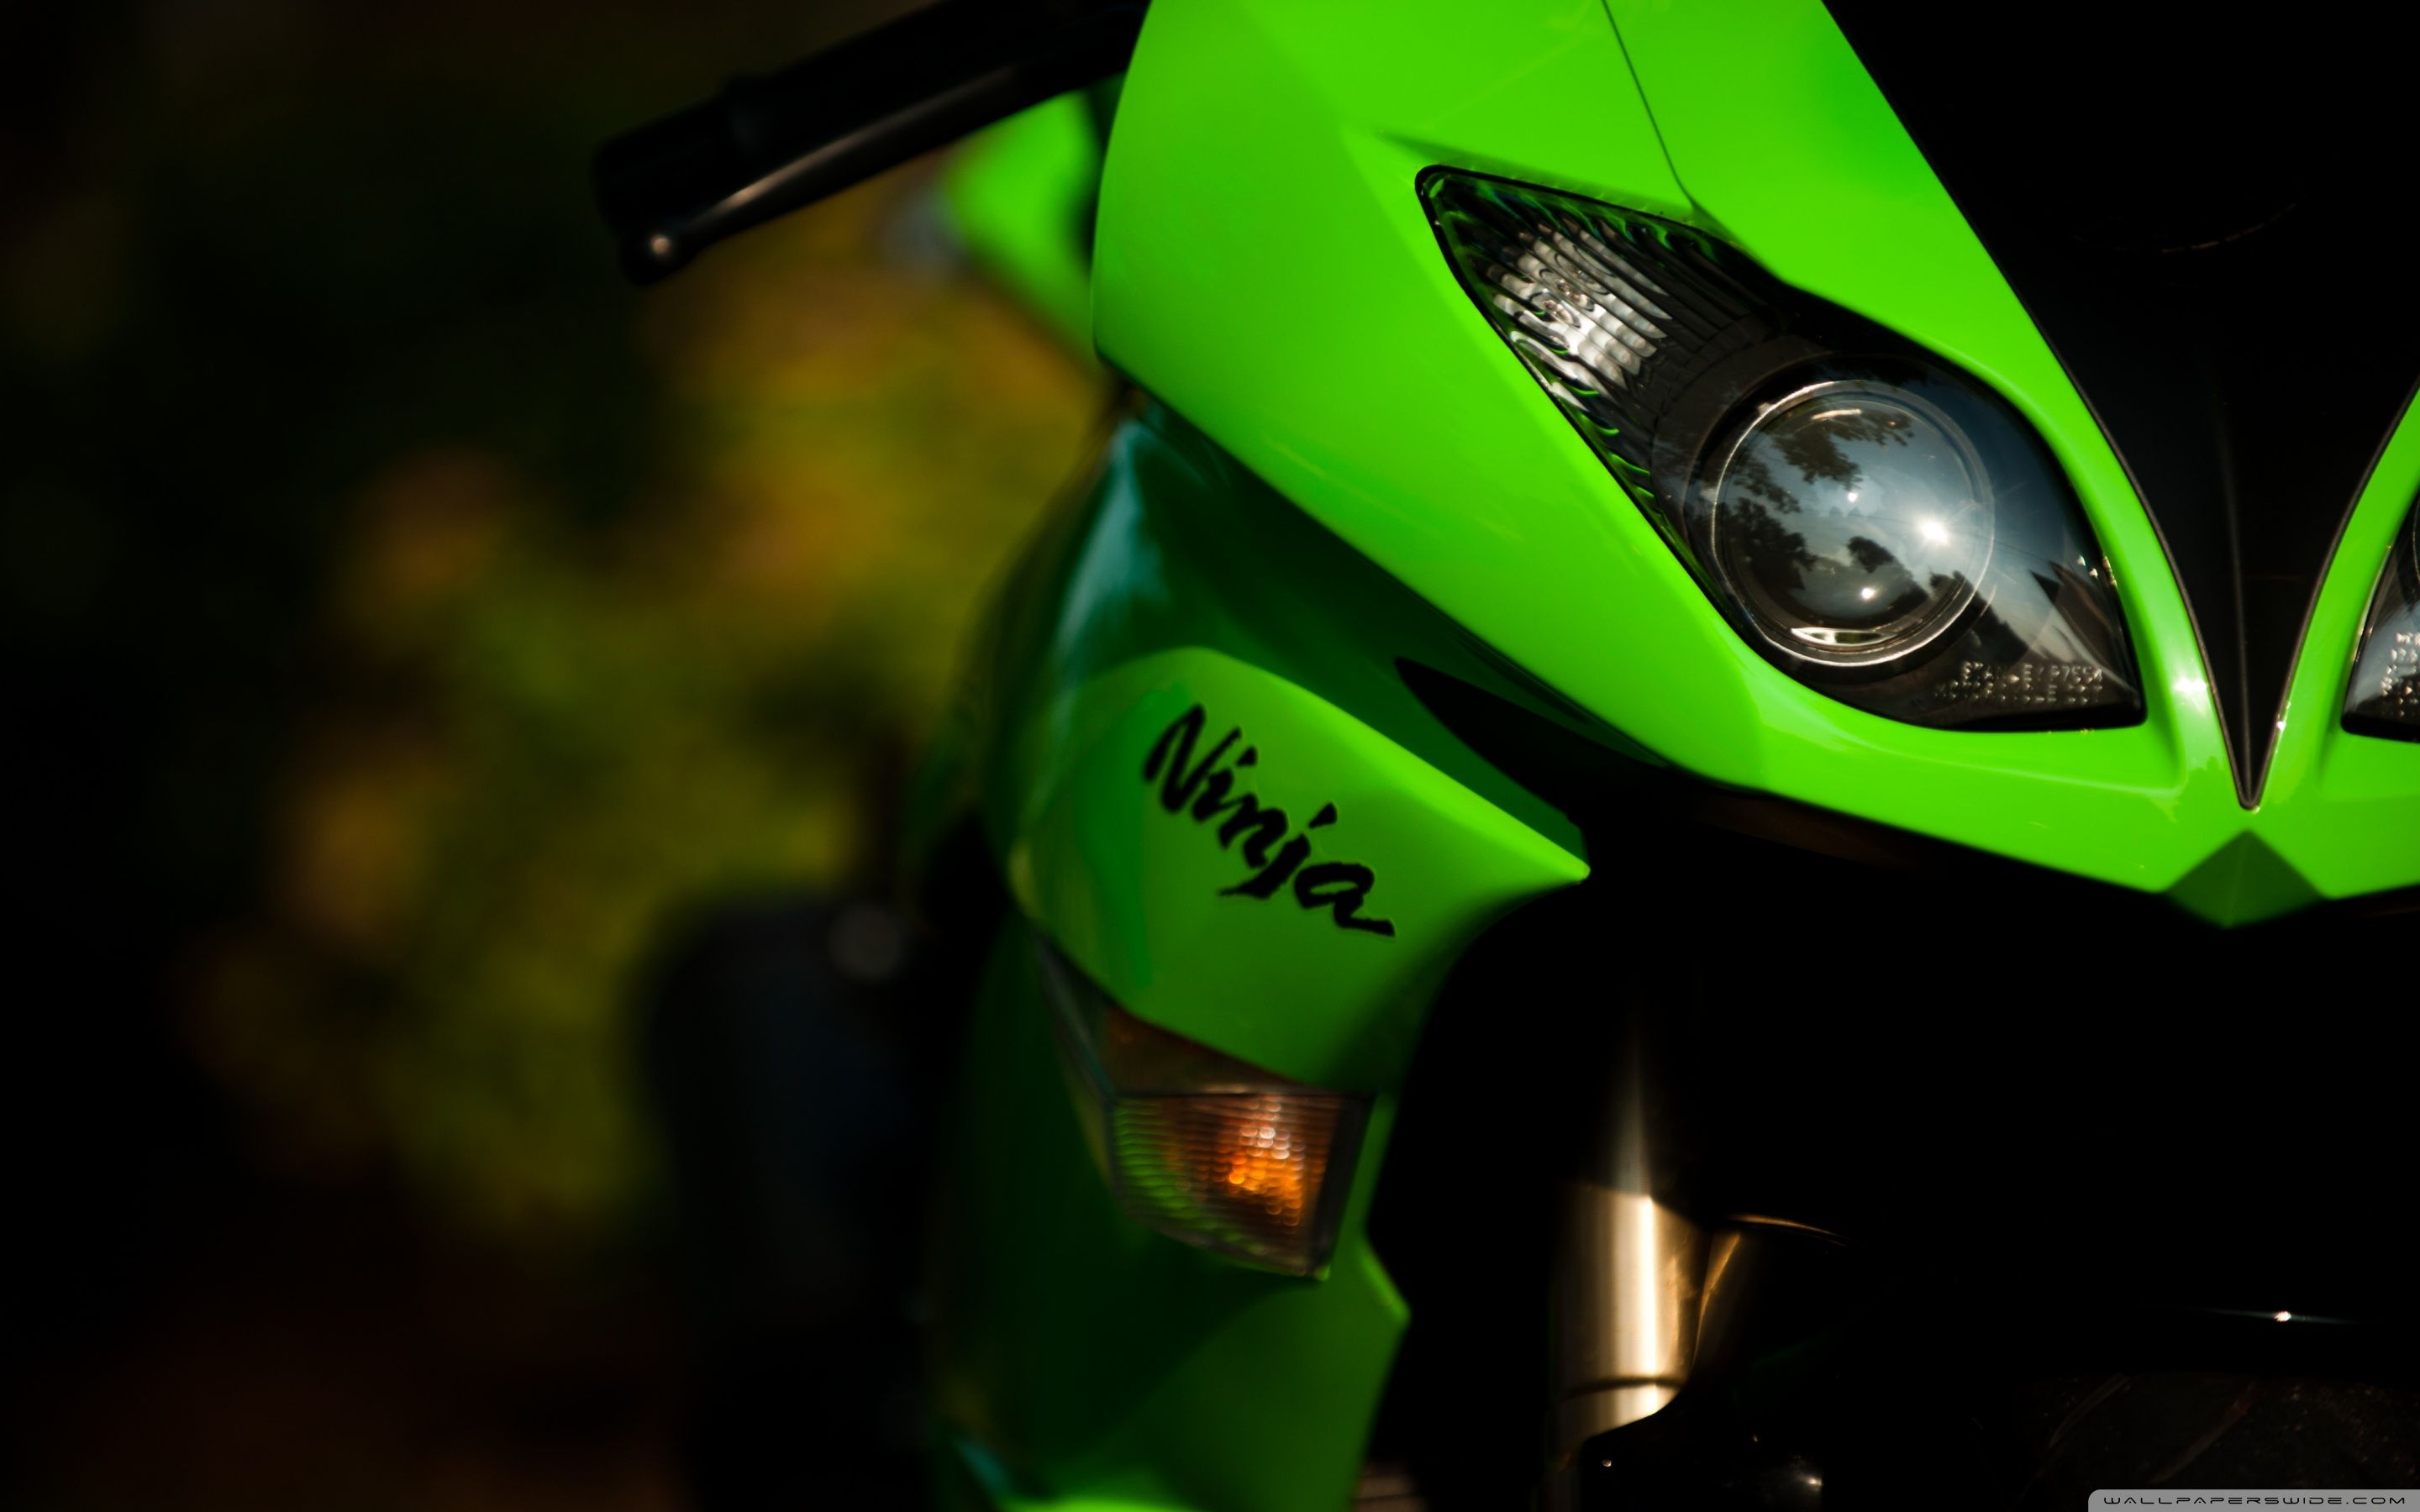 Green Motorcycle Wallpapers